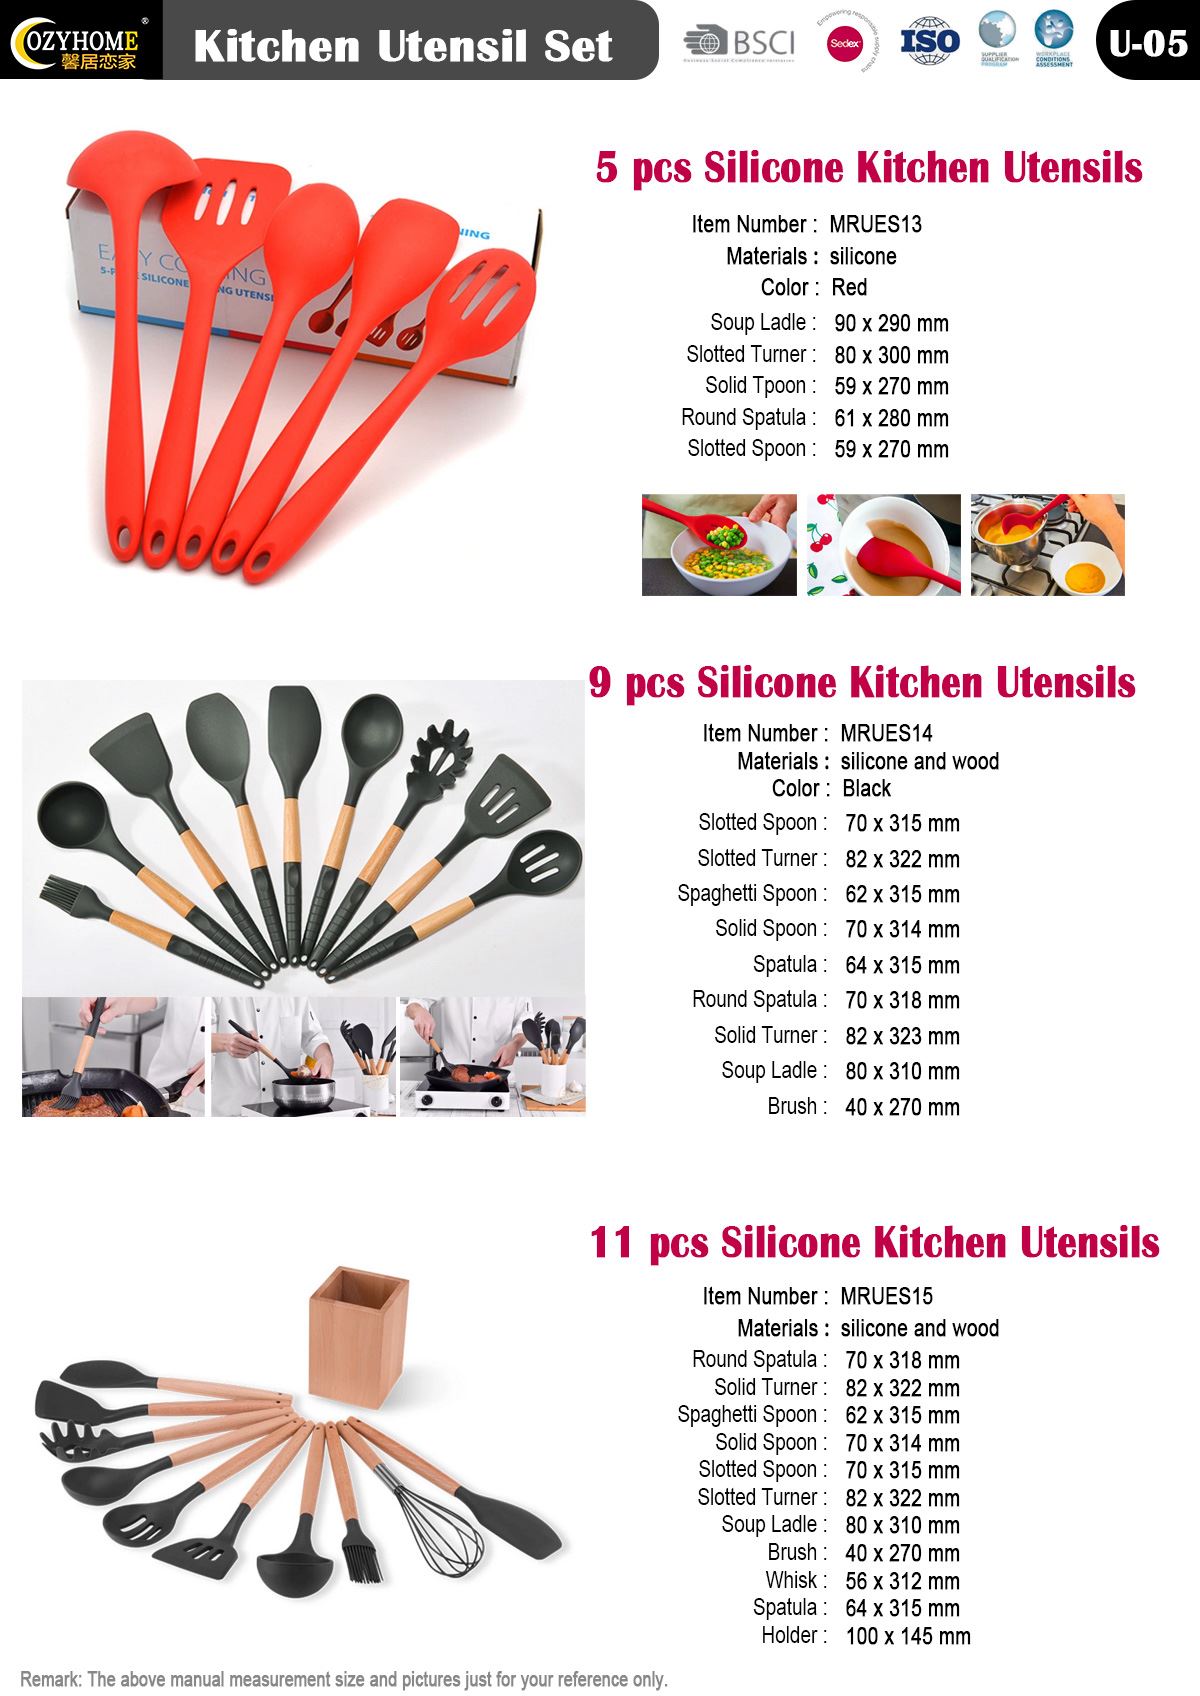 Silicone Kitchen Utensils 2019 Pages: 05